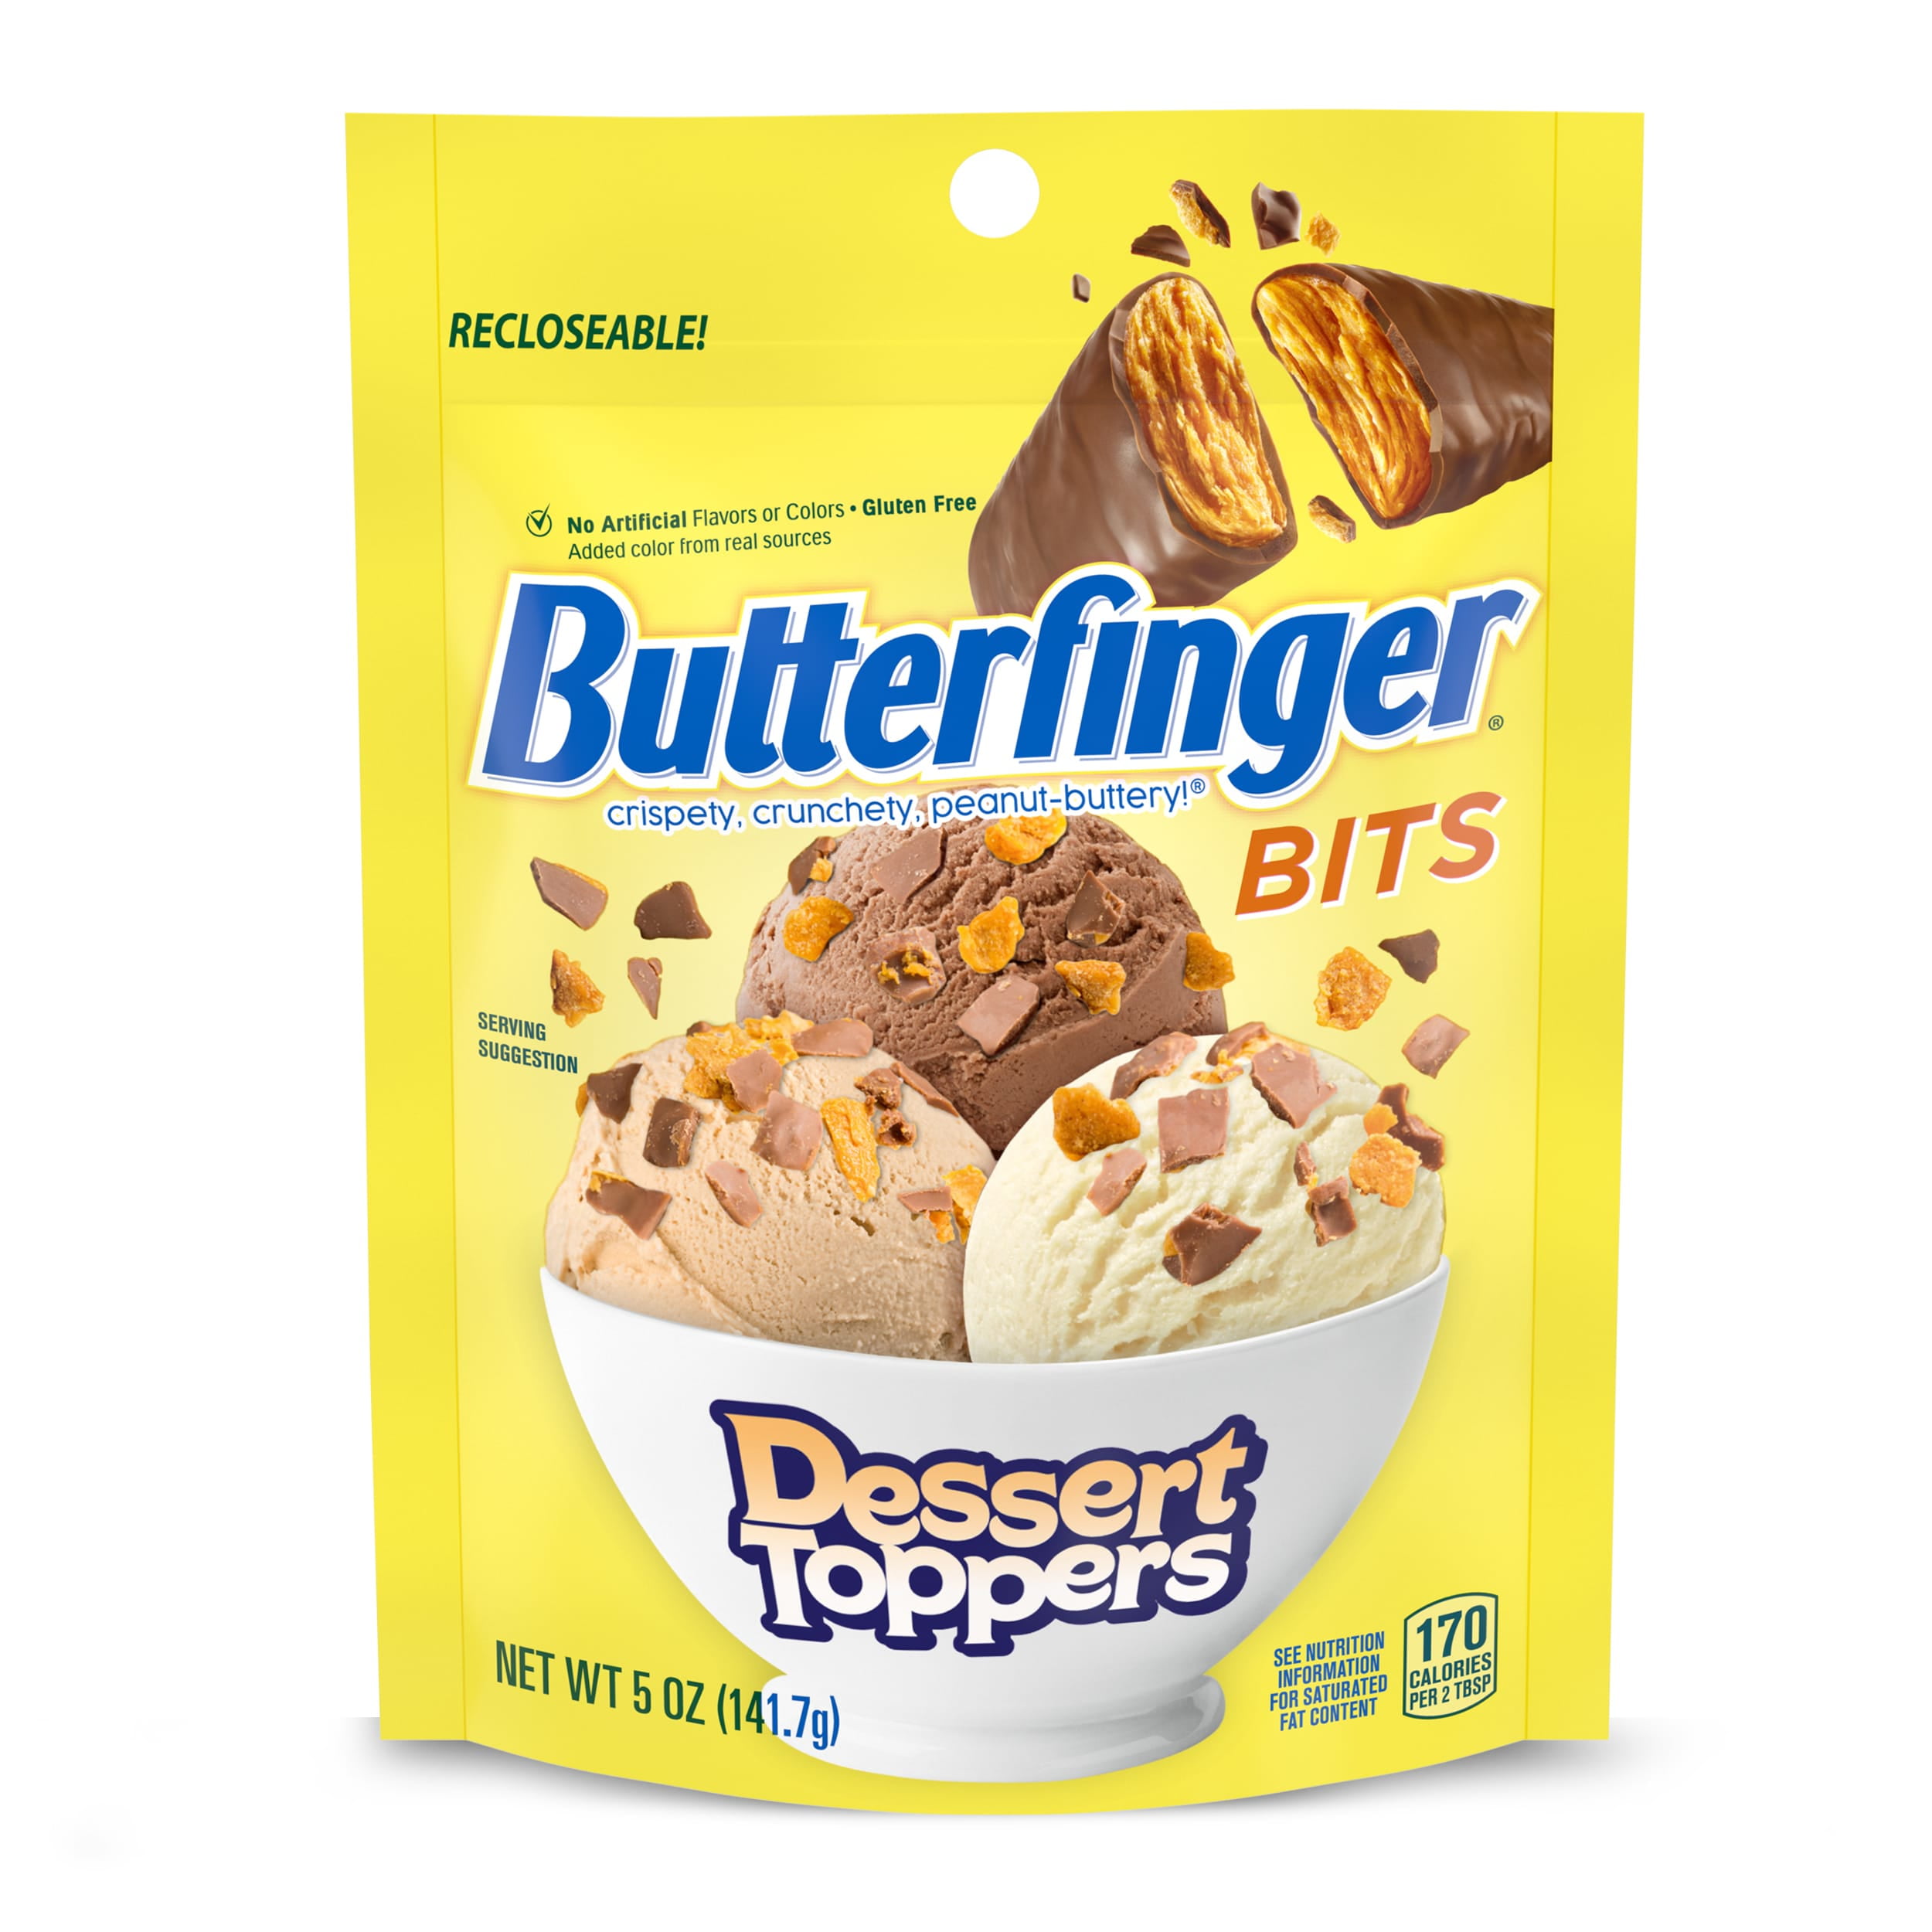 Butterfinger, Chocolatey, Peanut-Buttery, Dessert Toppers, Perfect for Easter Baking, 5 oz